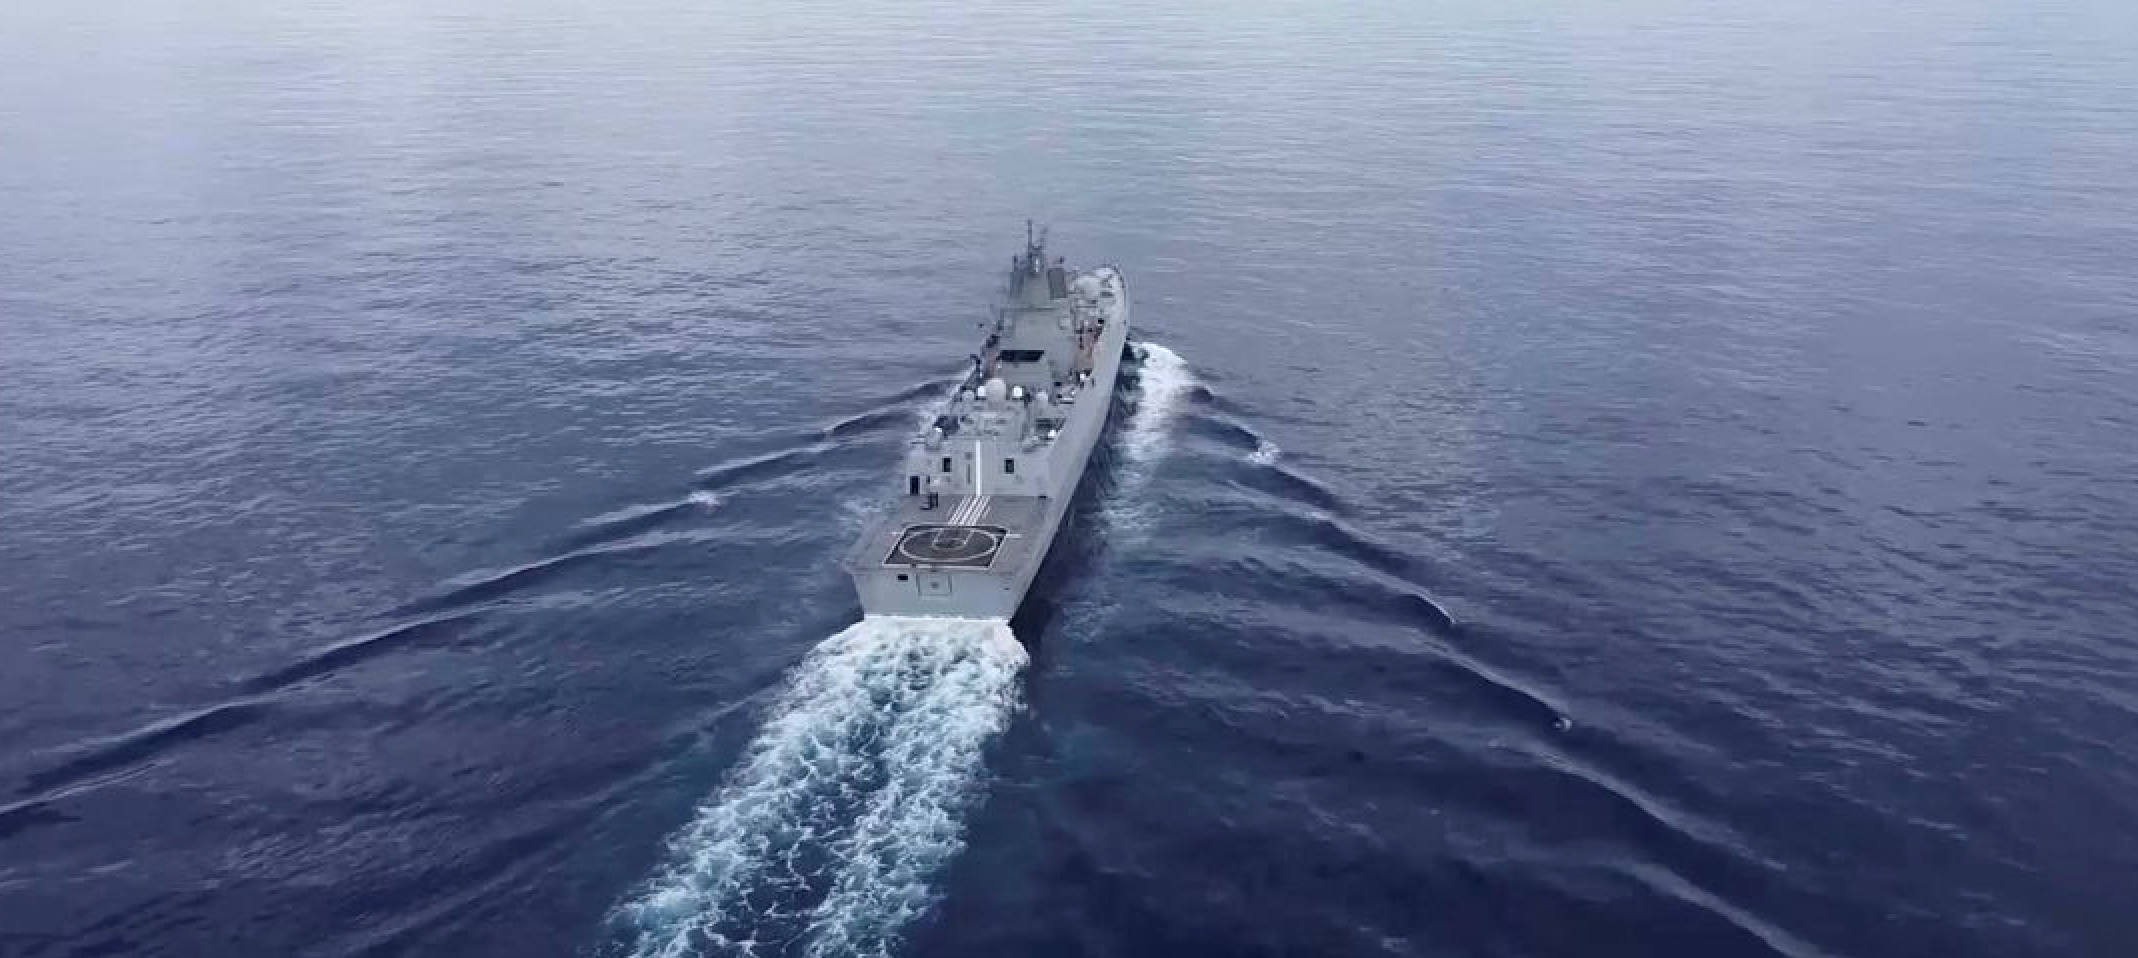  A still image from video released by the Russian Defence Ministry shows what it said to be frigate 'Admiral of the Fleet of the Soviet Union Gorshkov'